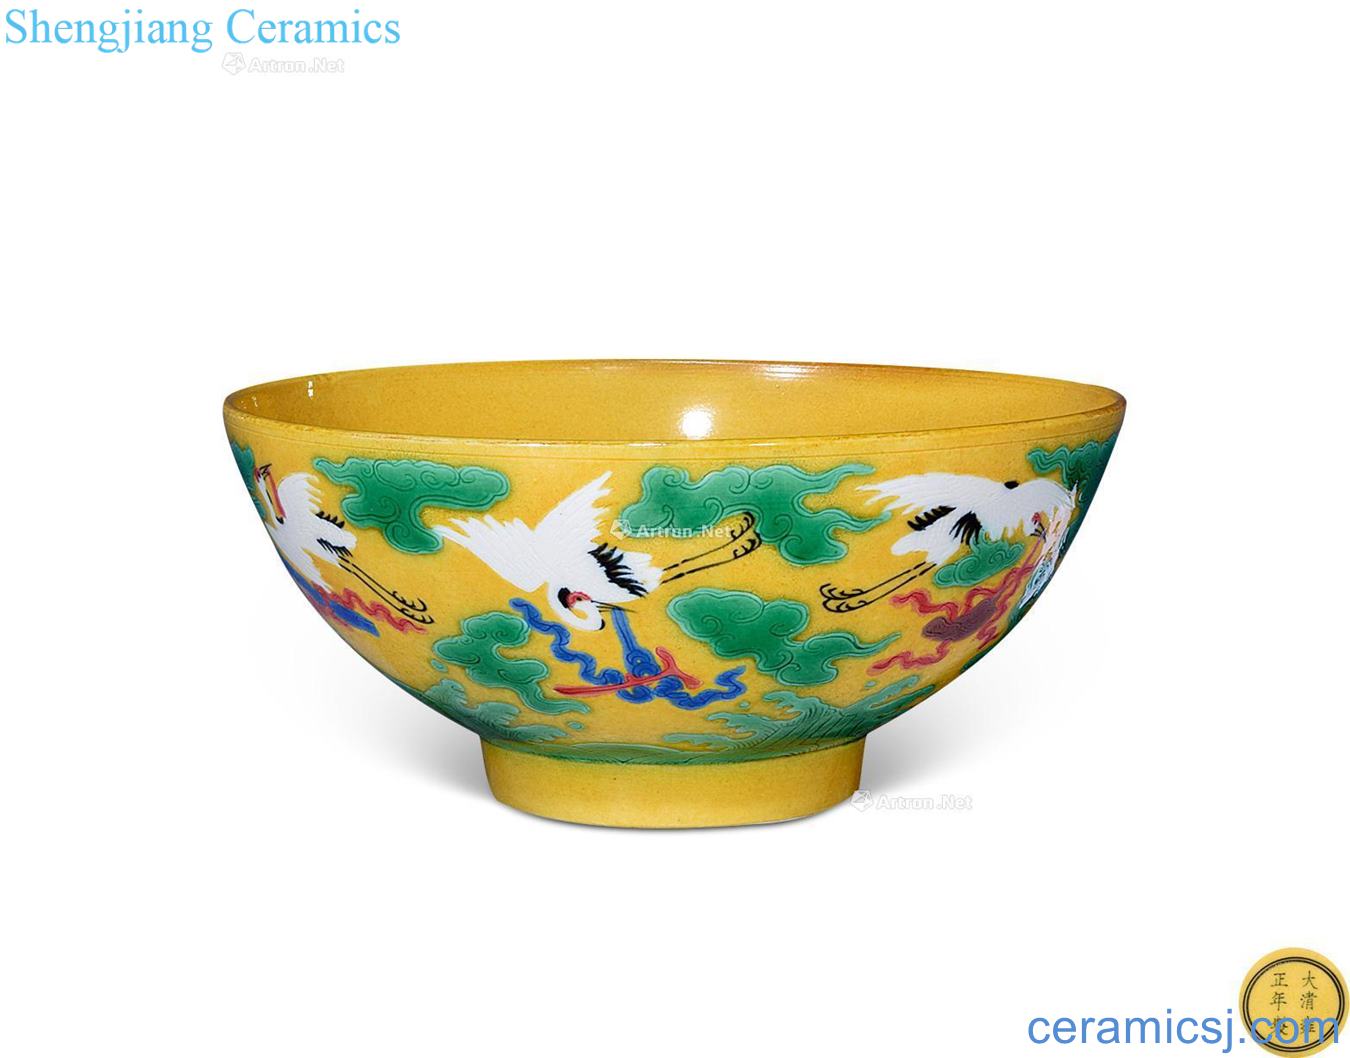 Qing yongzheng Yellow color auspicious James t. c. na was published in grain dishes